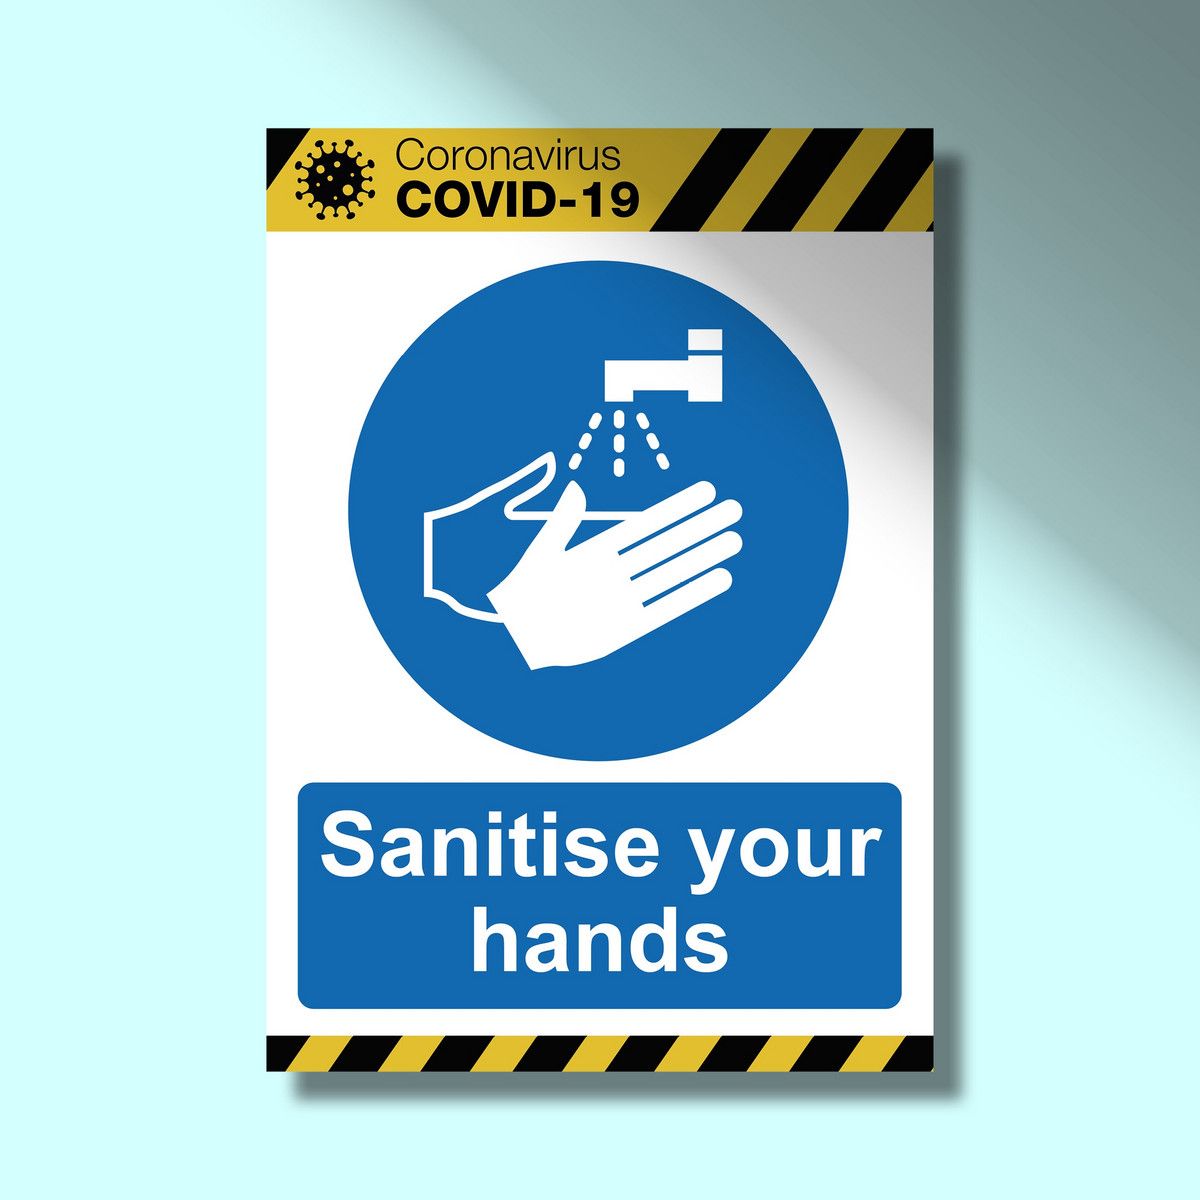 Covid-19 Safety Sign_Sanitise Hands - Covid19.jpg